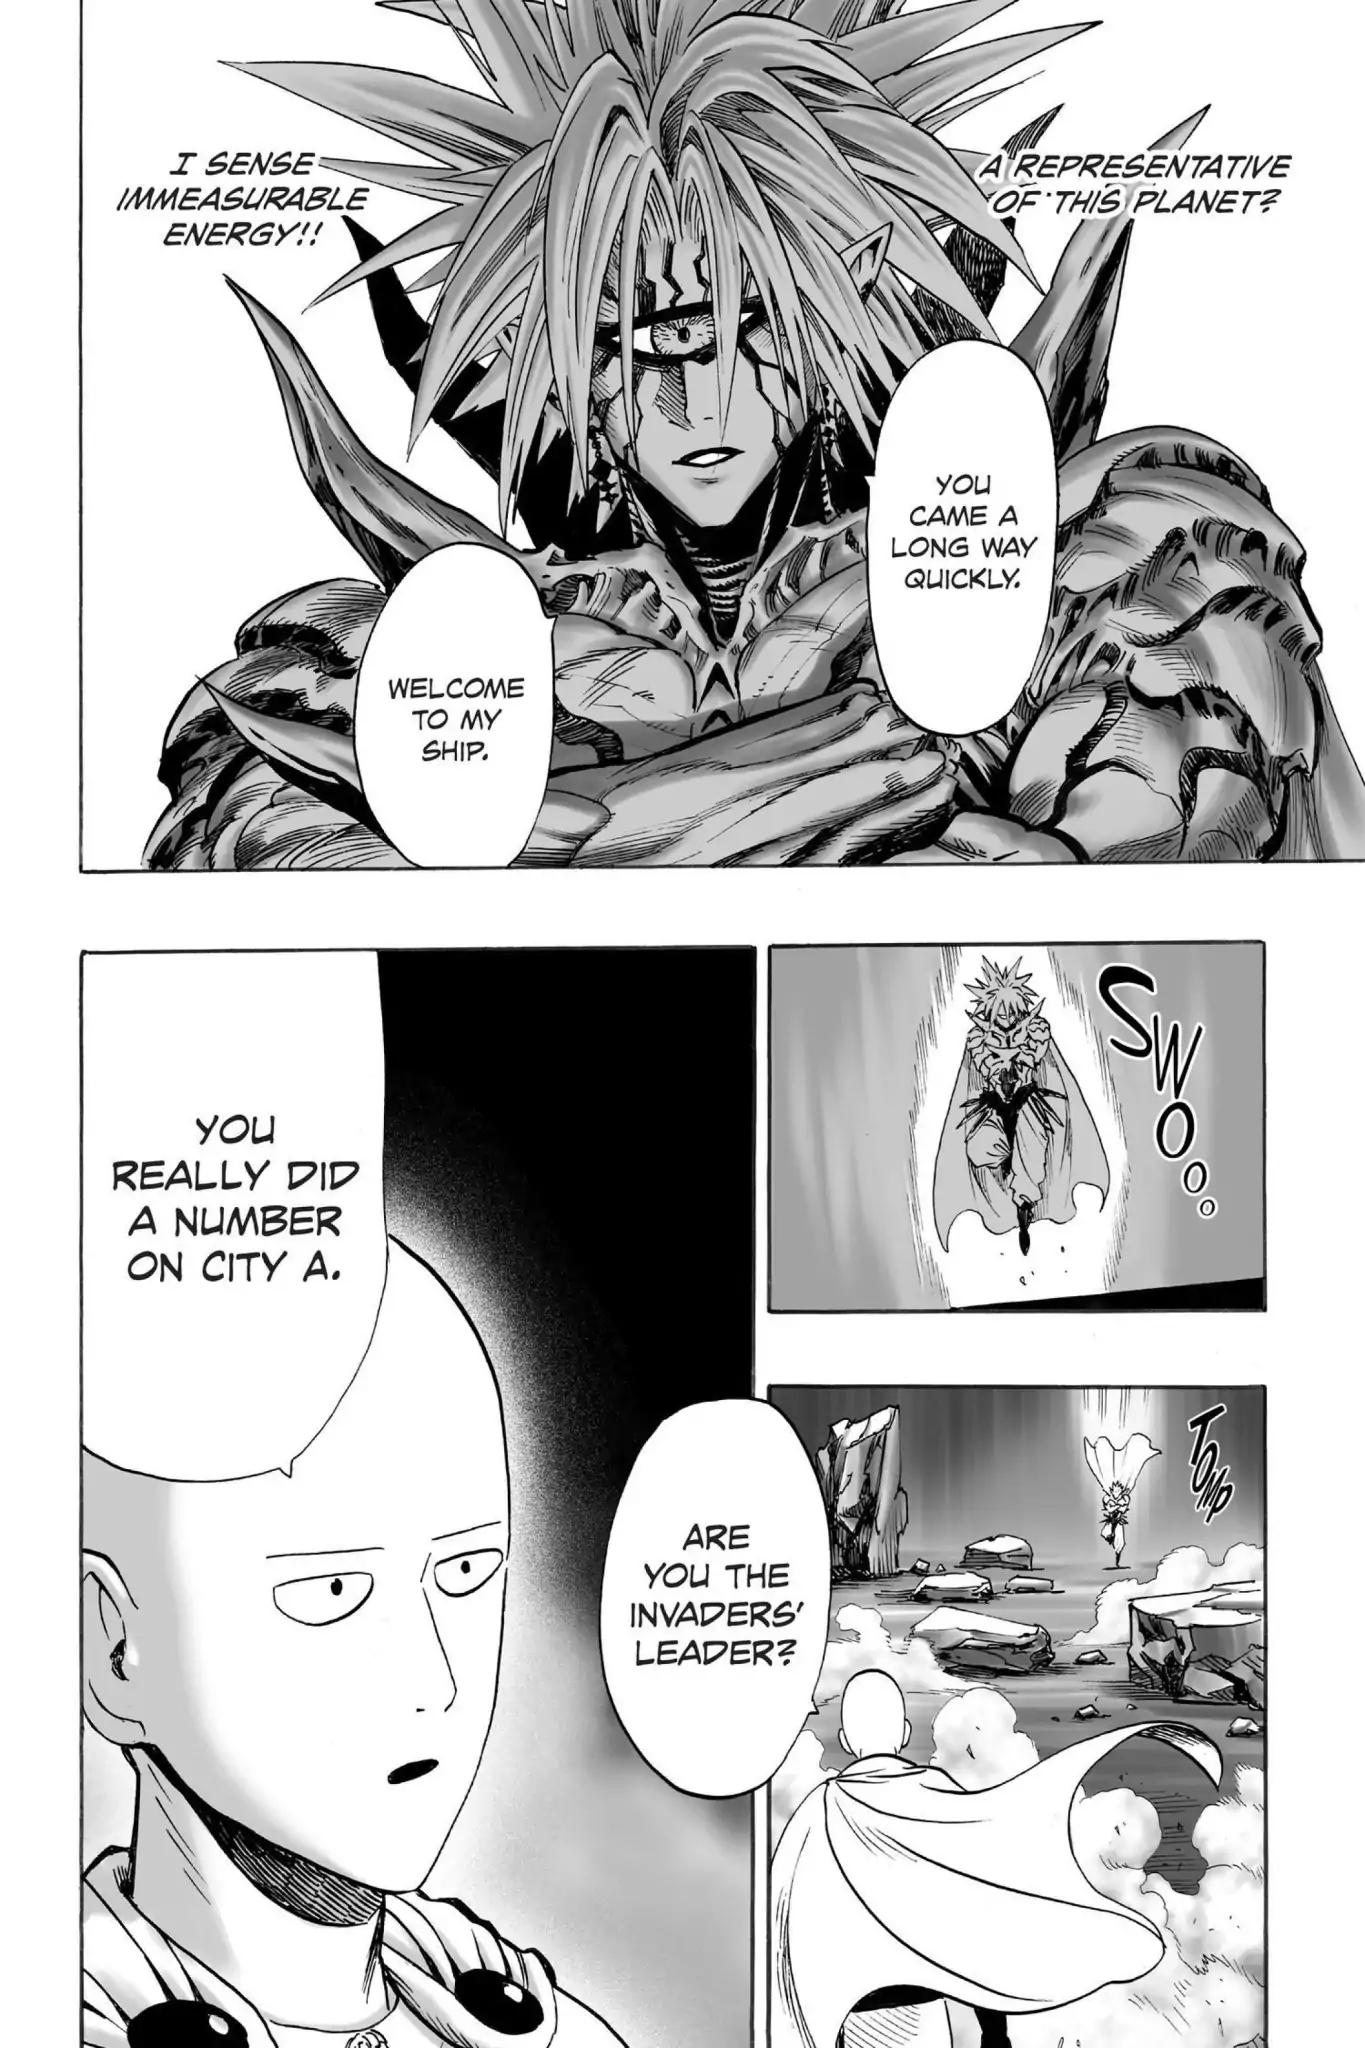 One-Punch Man chapter 33 page 23